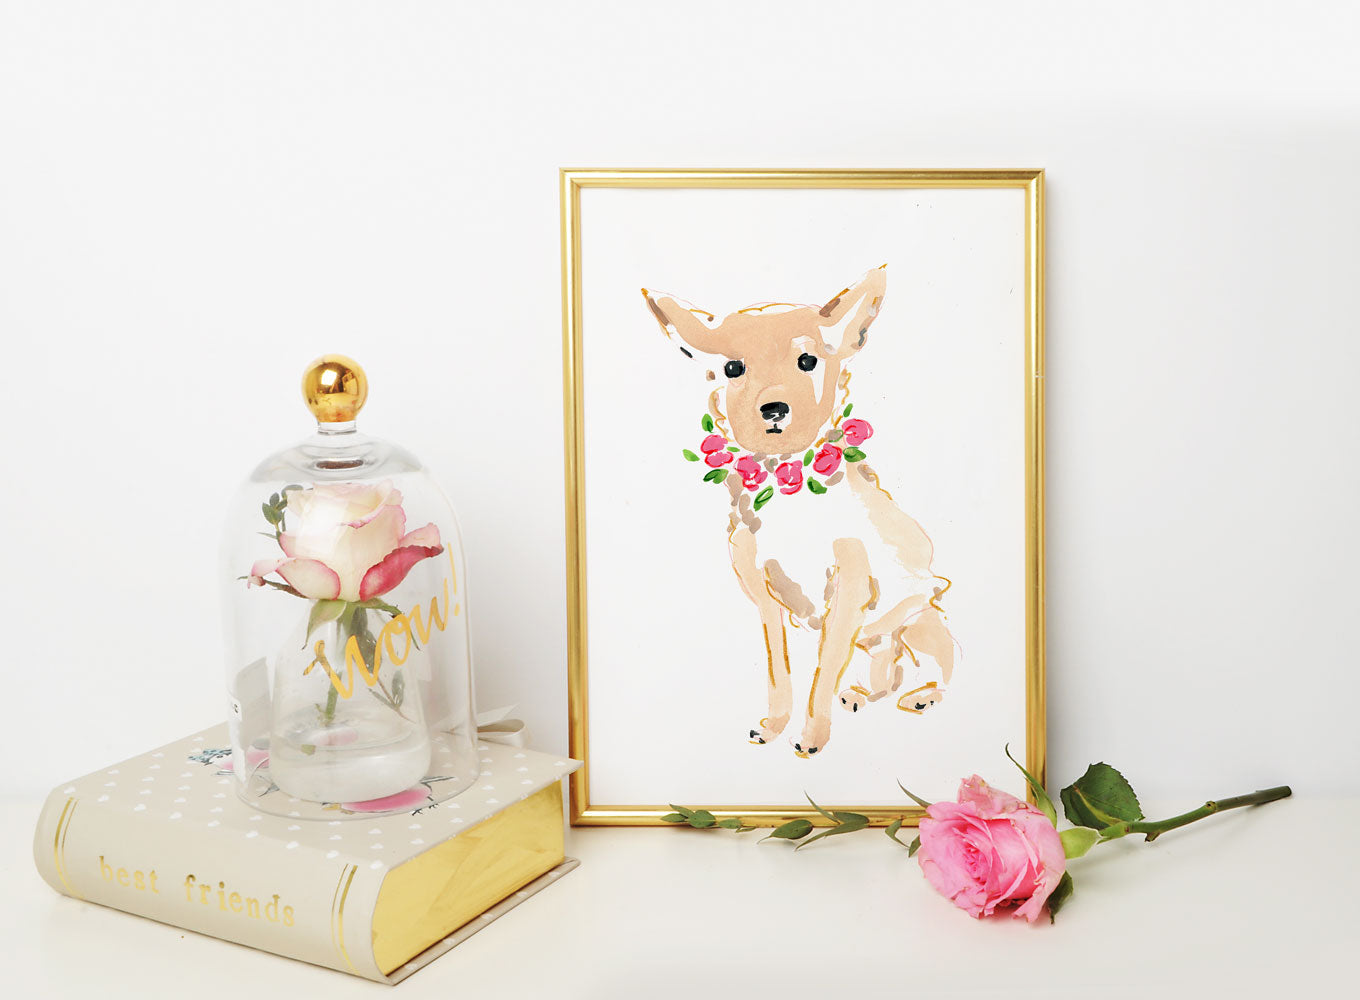 Coco Chihuahua Art Print - Dog Illustrations Wall Art Collection-Di Lewis